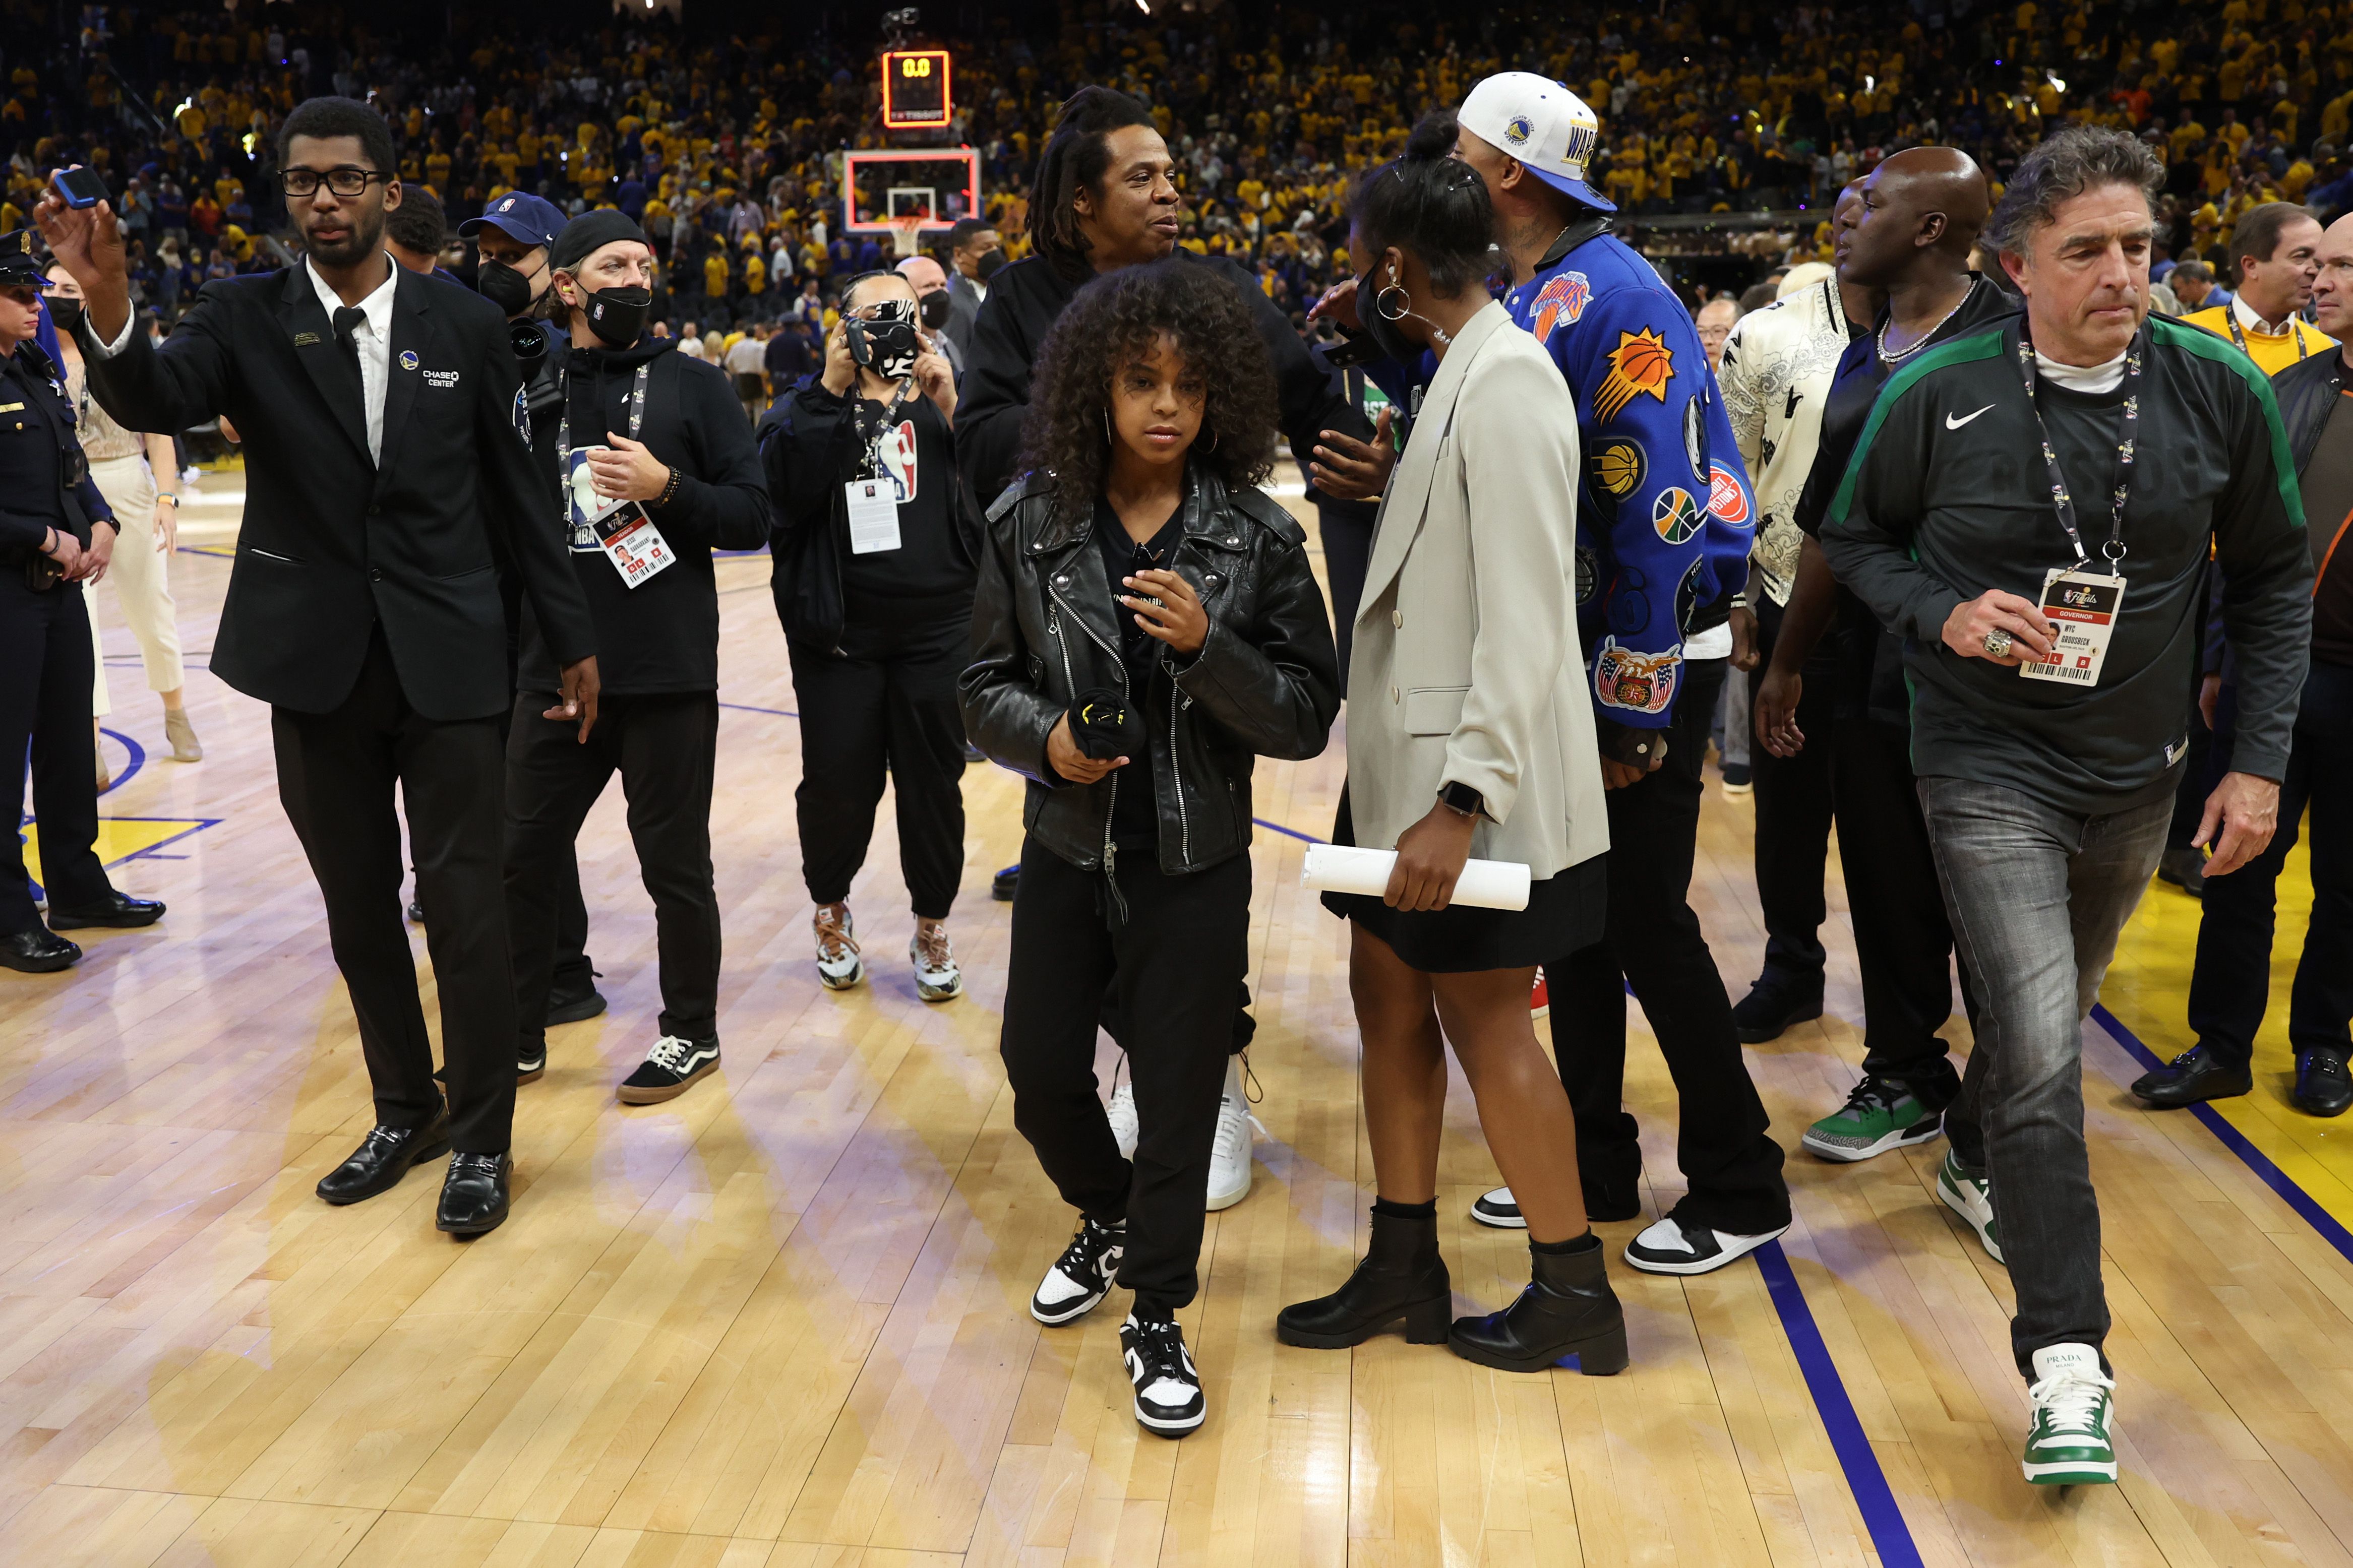 People are amazed at how much Blue Ivy Carter looks like Beyonce at recent  NBA outing: 'Literally twins